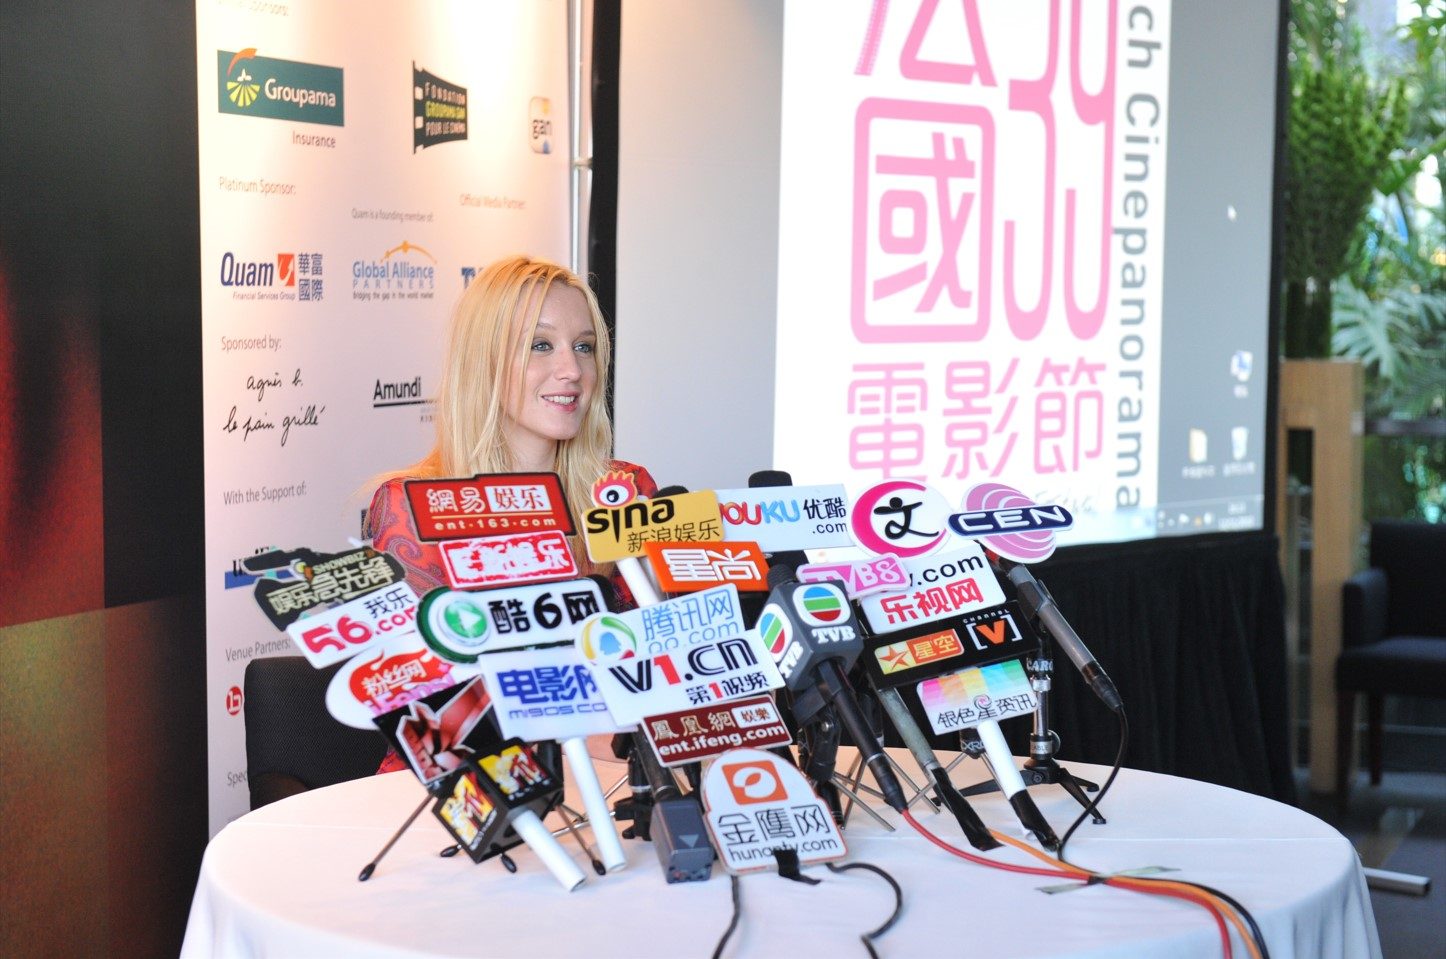 French actress Ludivine Sagnier in a press conferee presenting her two latest films, at the time "Lily Sometimes" and "Love Crimes" during the Film Festival in 2010. 